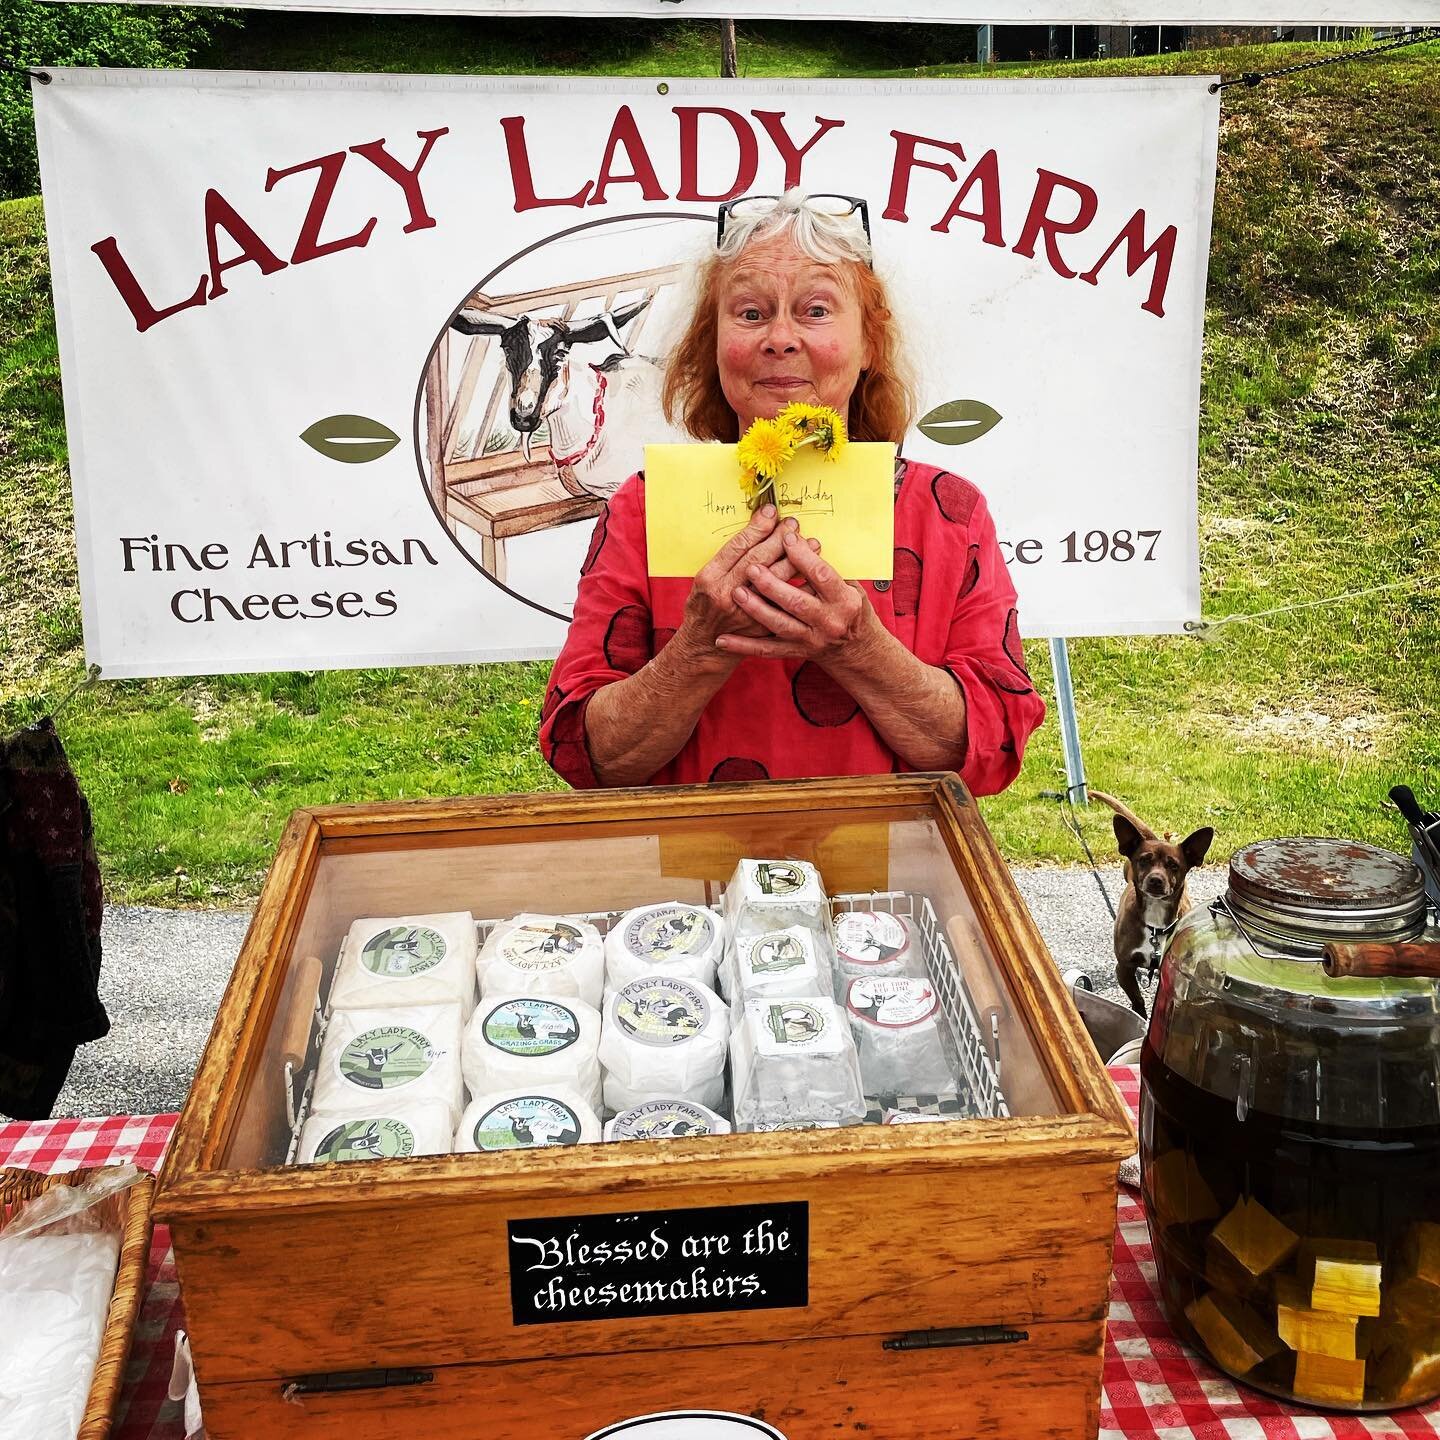 Happy Birthday to the one, the only, @lazy_lady_farm! ❤️

#goatcheese #knowyourfarmers #farmersmarketsareessential #montpeliervt